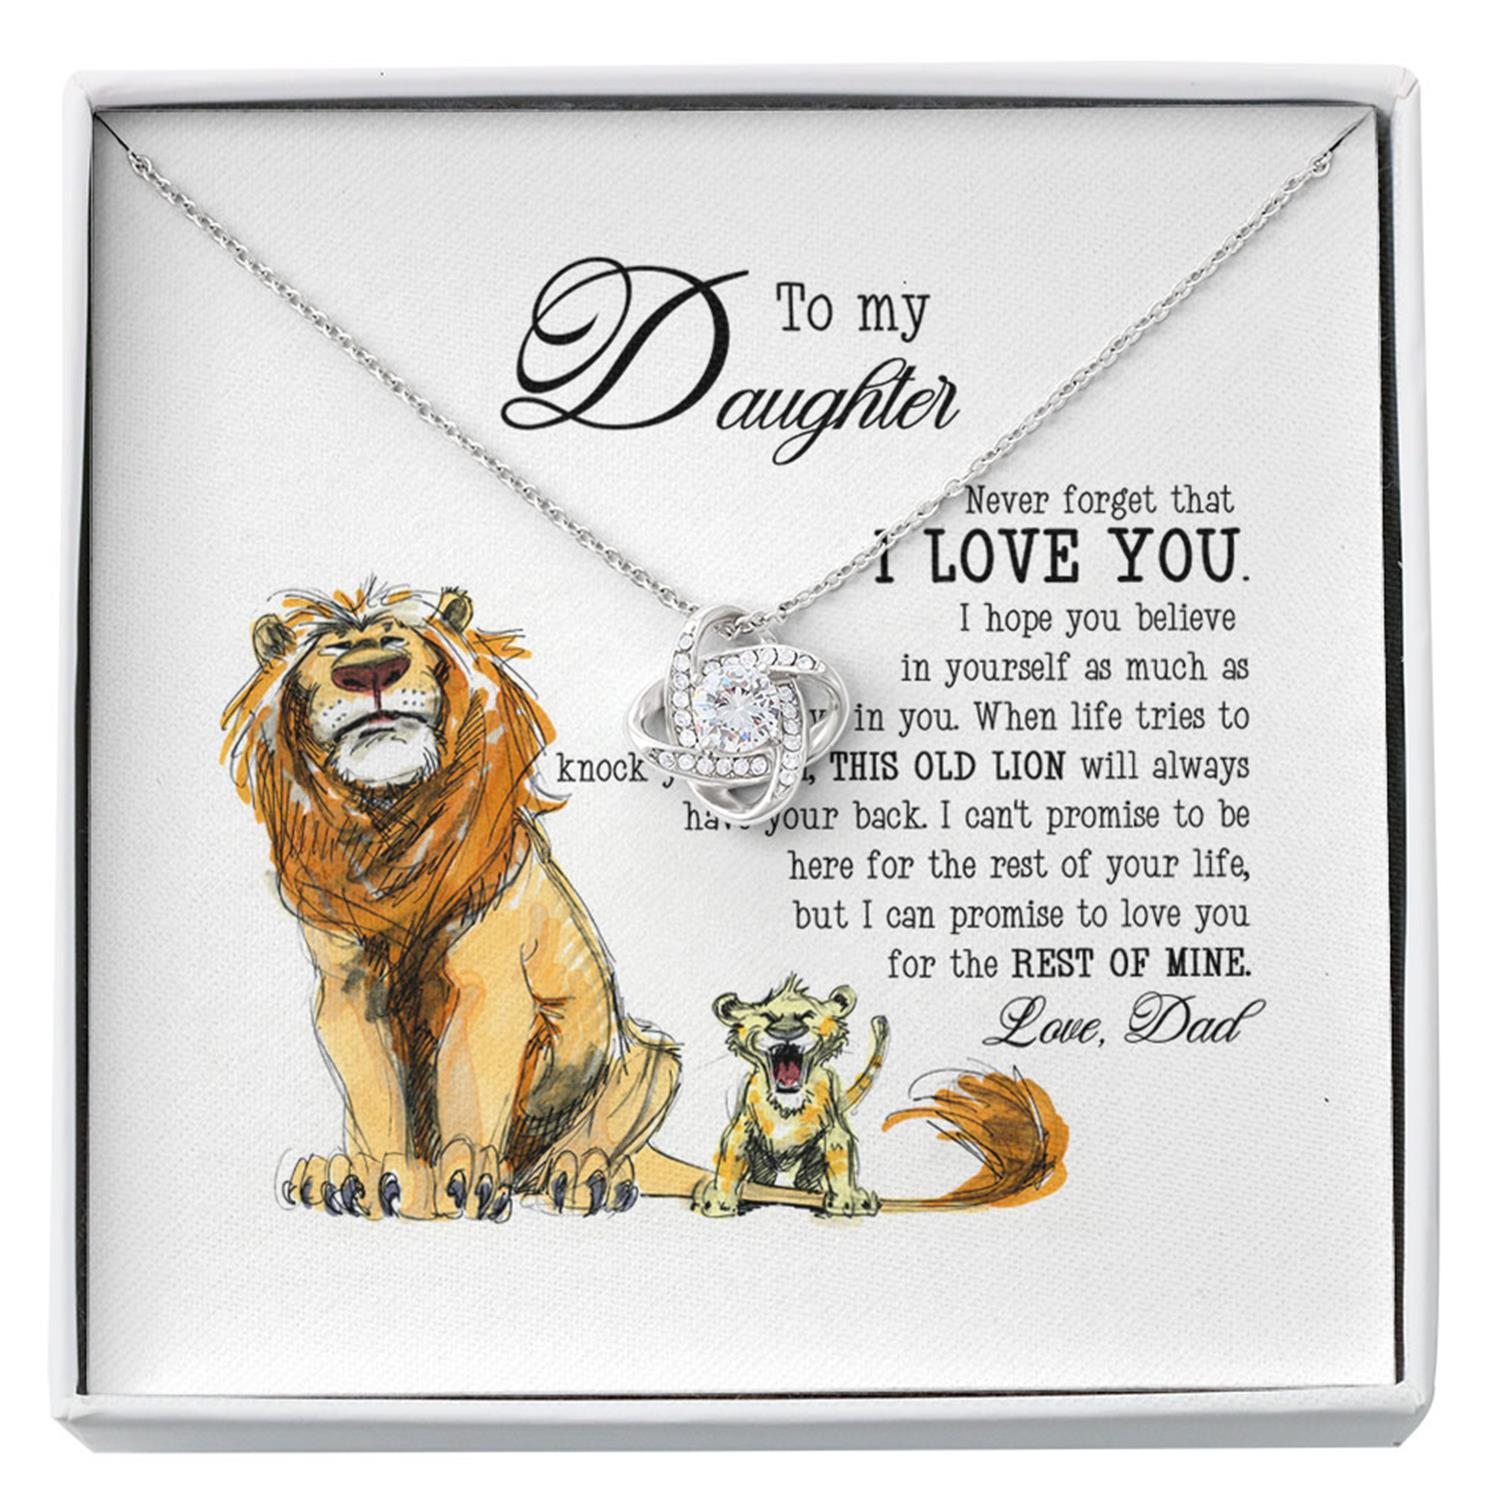 Daughter Necklace, To My Daughter Necklace Gift From Dad - This Old Lion Will Always Have Your Back Custom Necklace